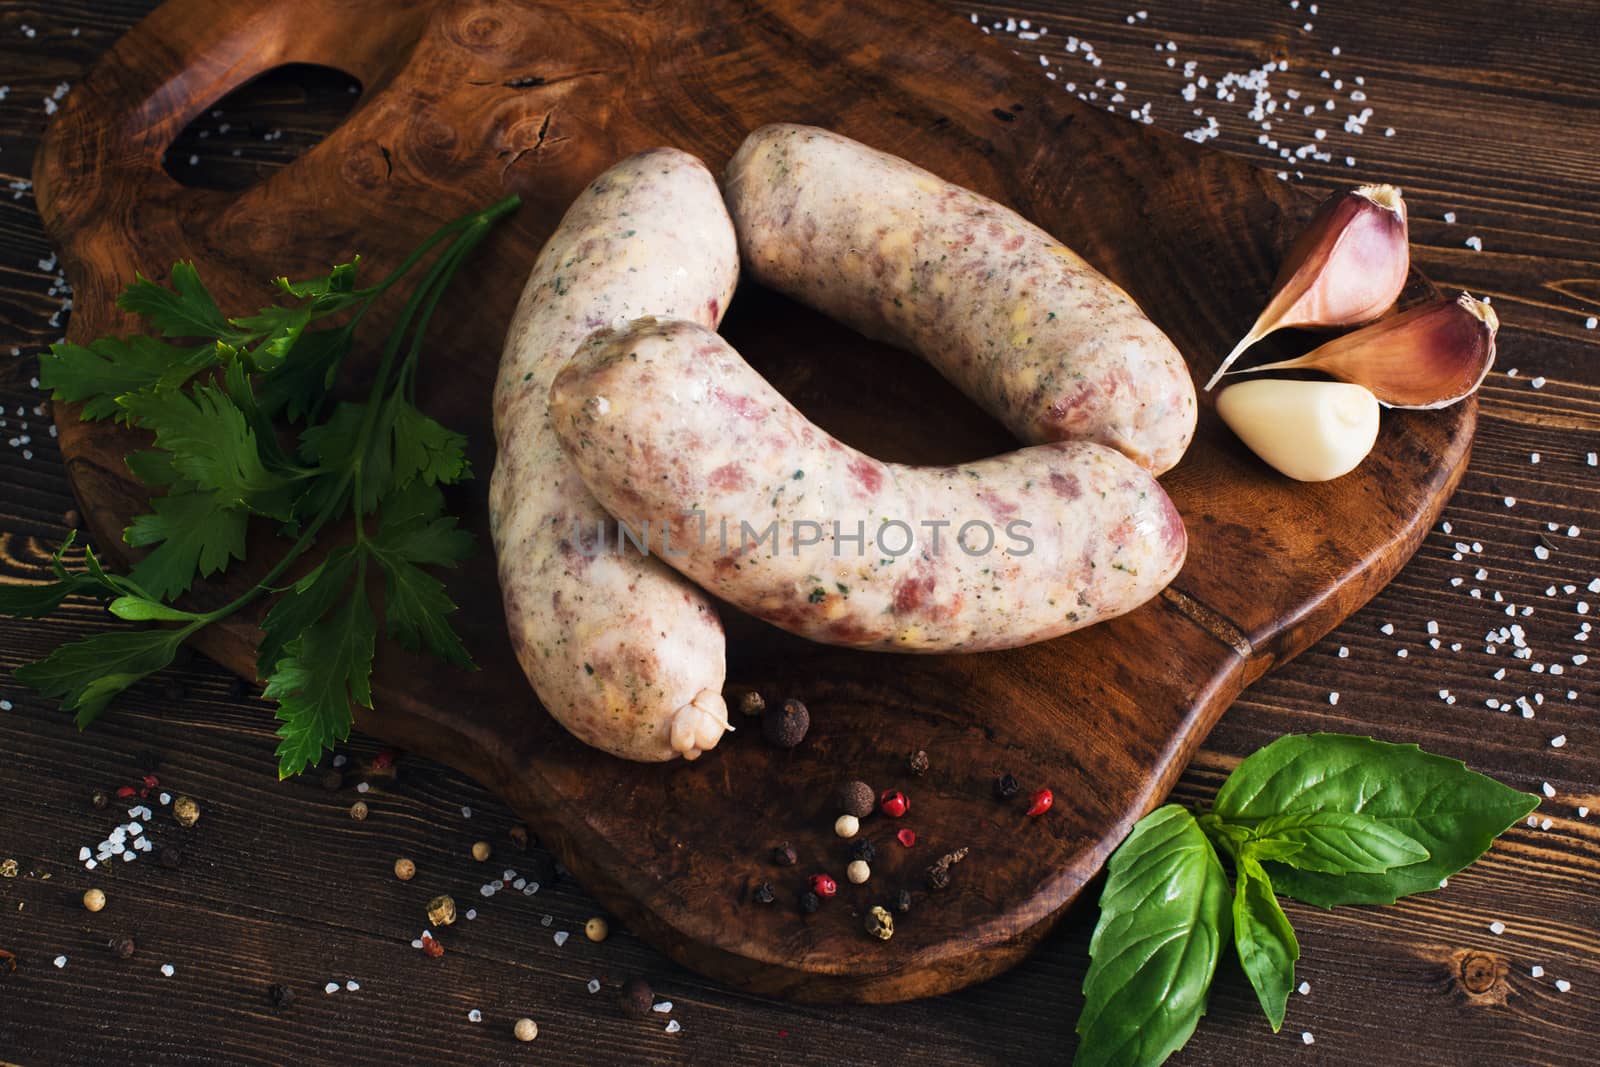 Raw sausages with garlic and parsley on the cutting board